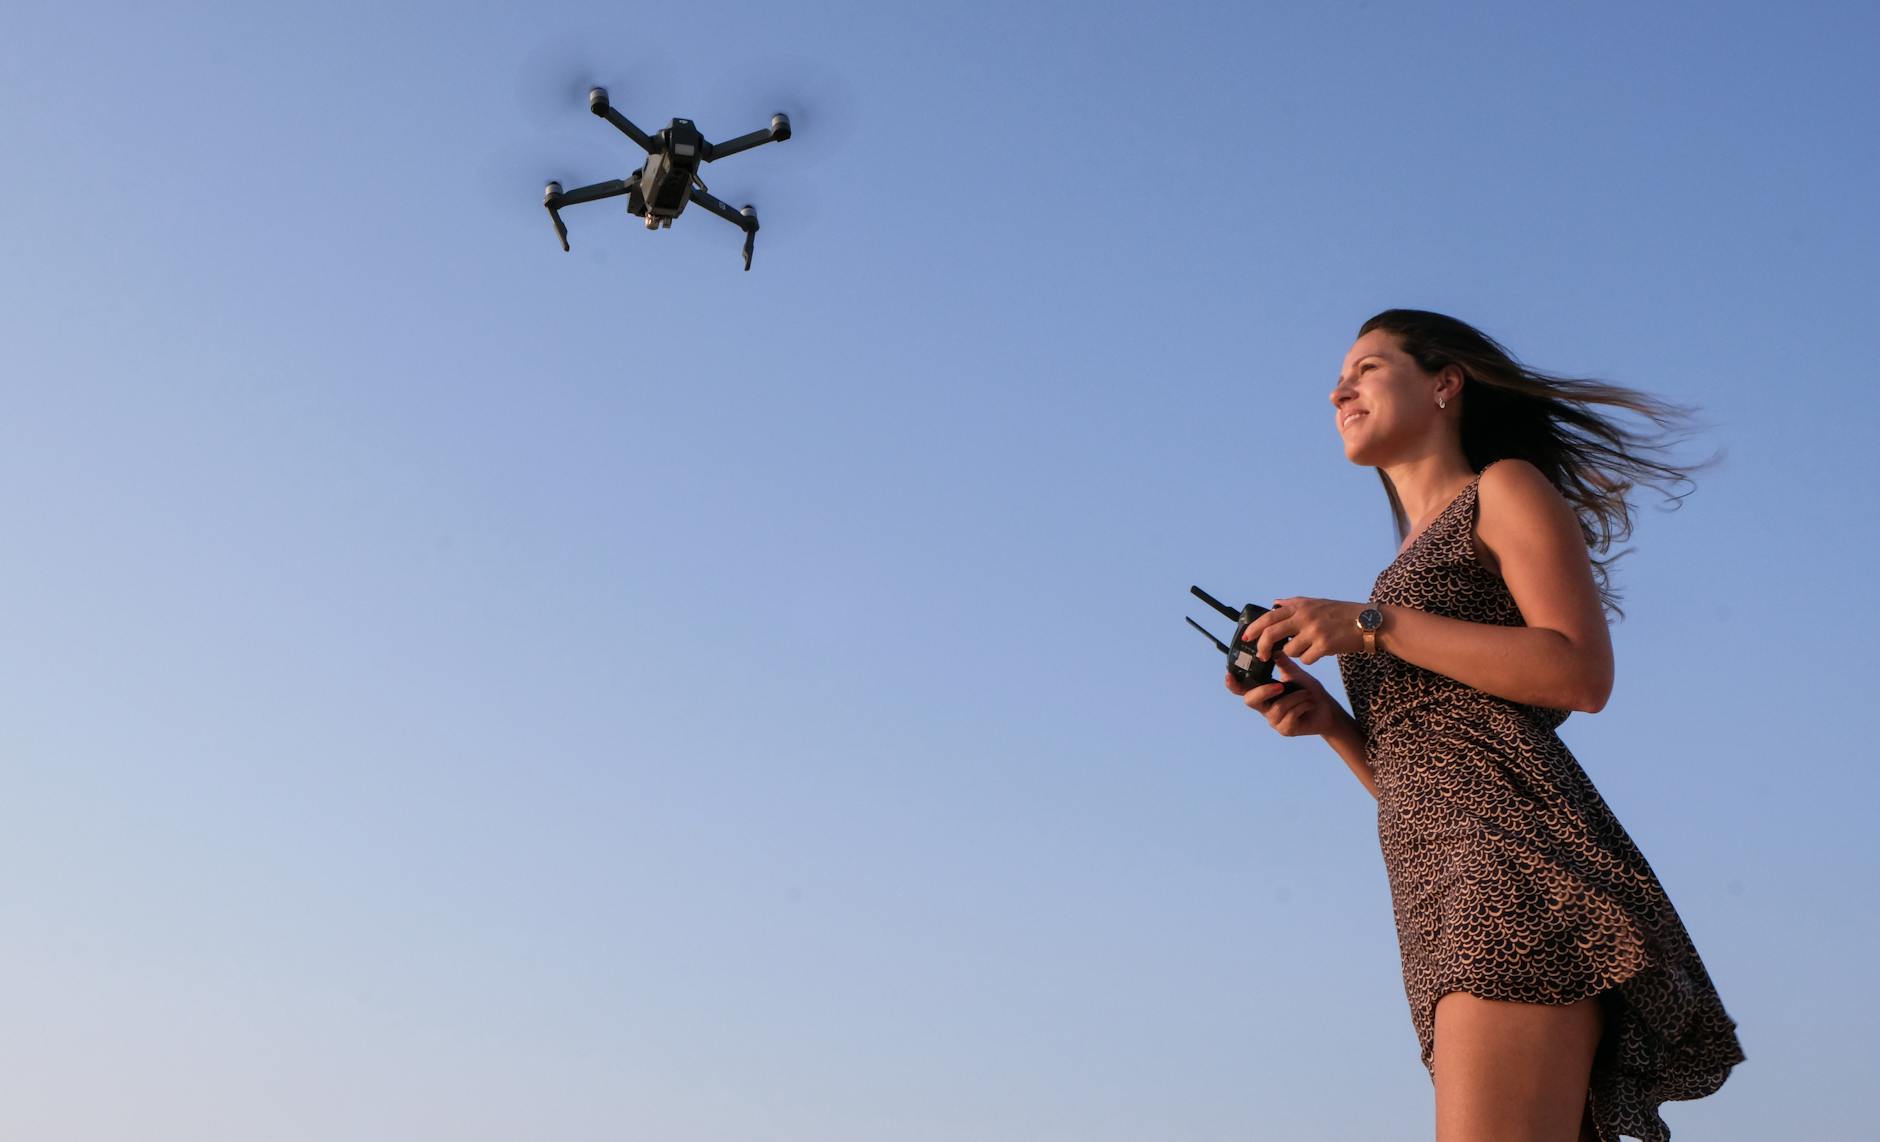 Best Drone For 2020: You Won’t Need Anything After This!